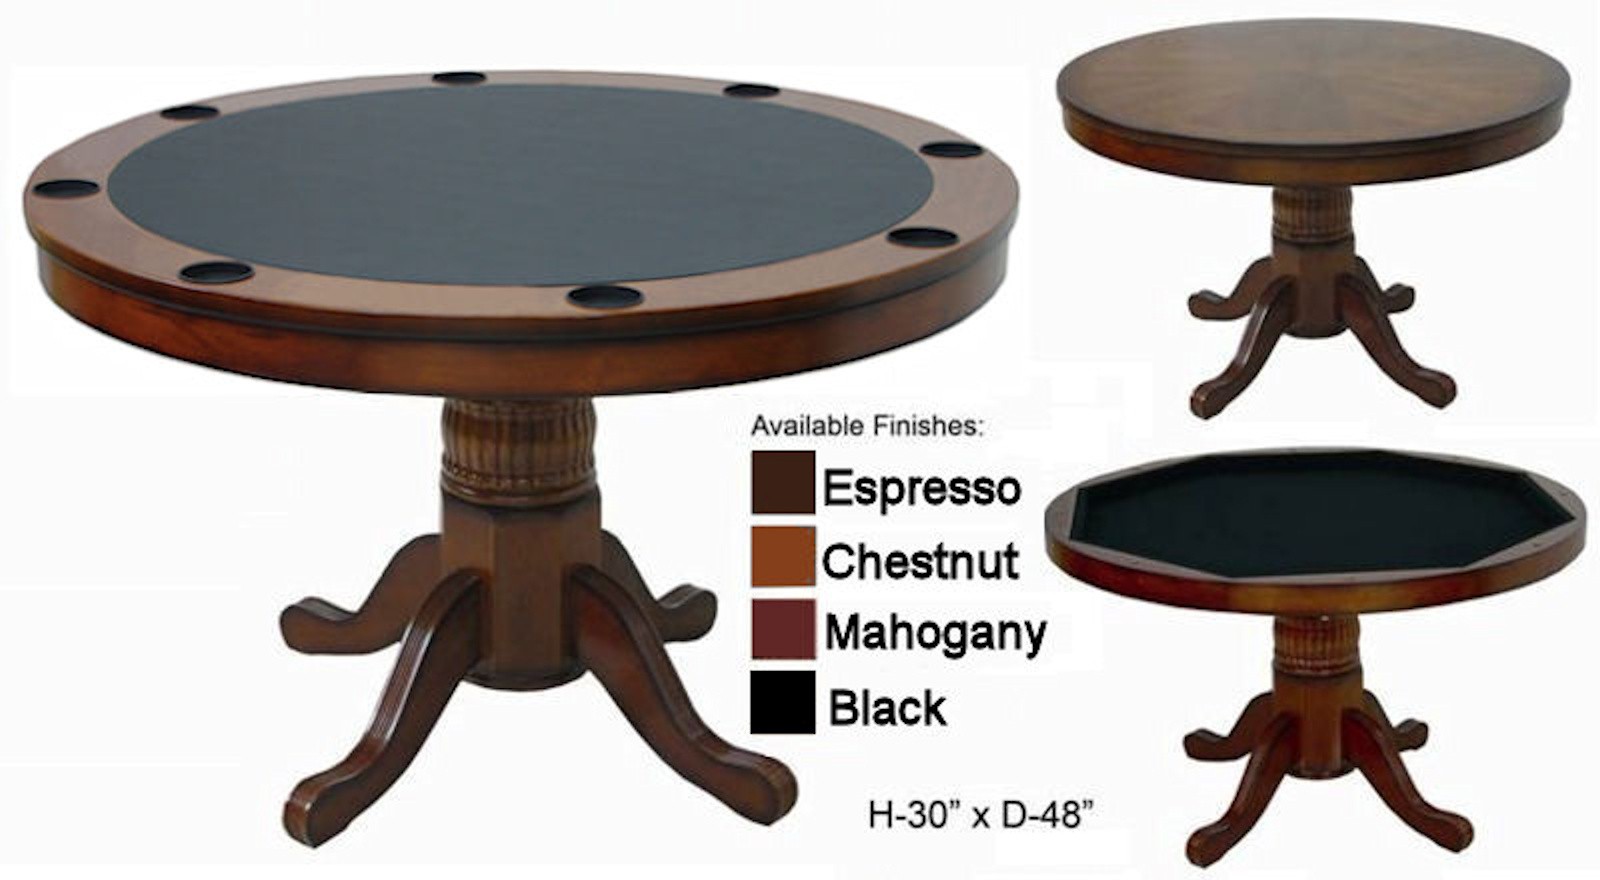 2 in 1 poker table with reversible dining or poker